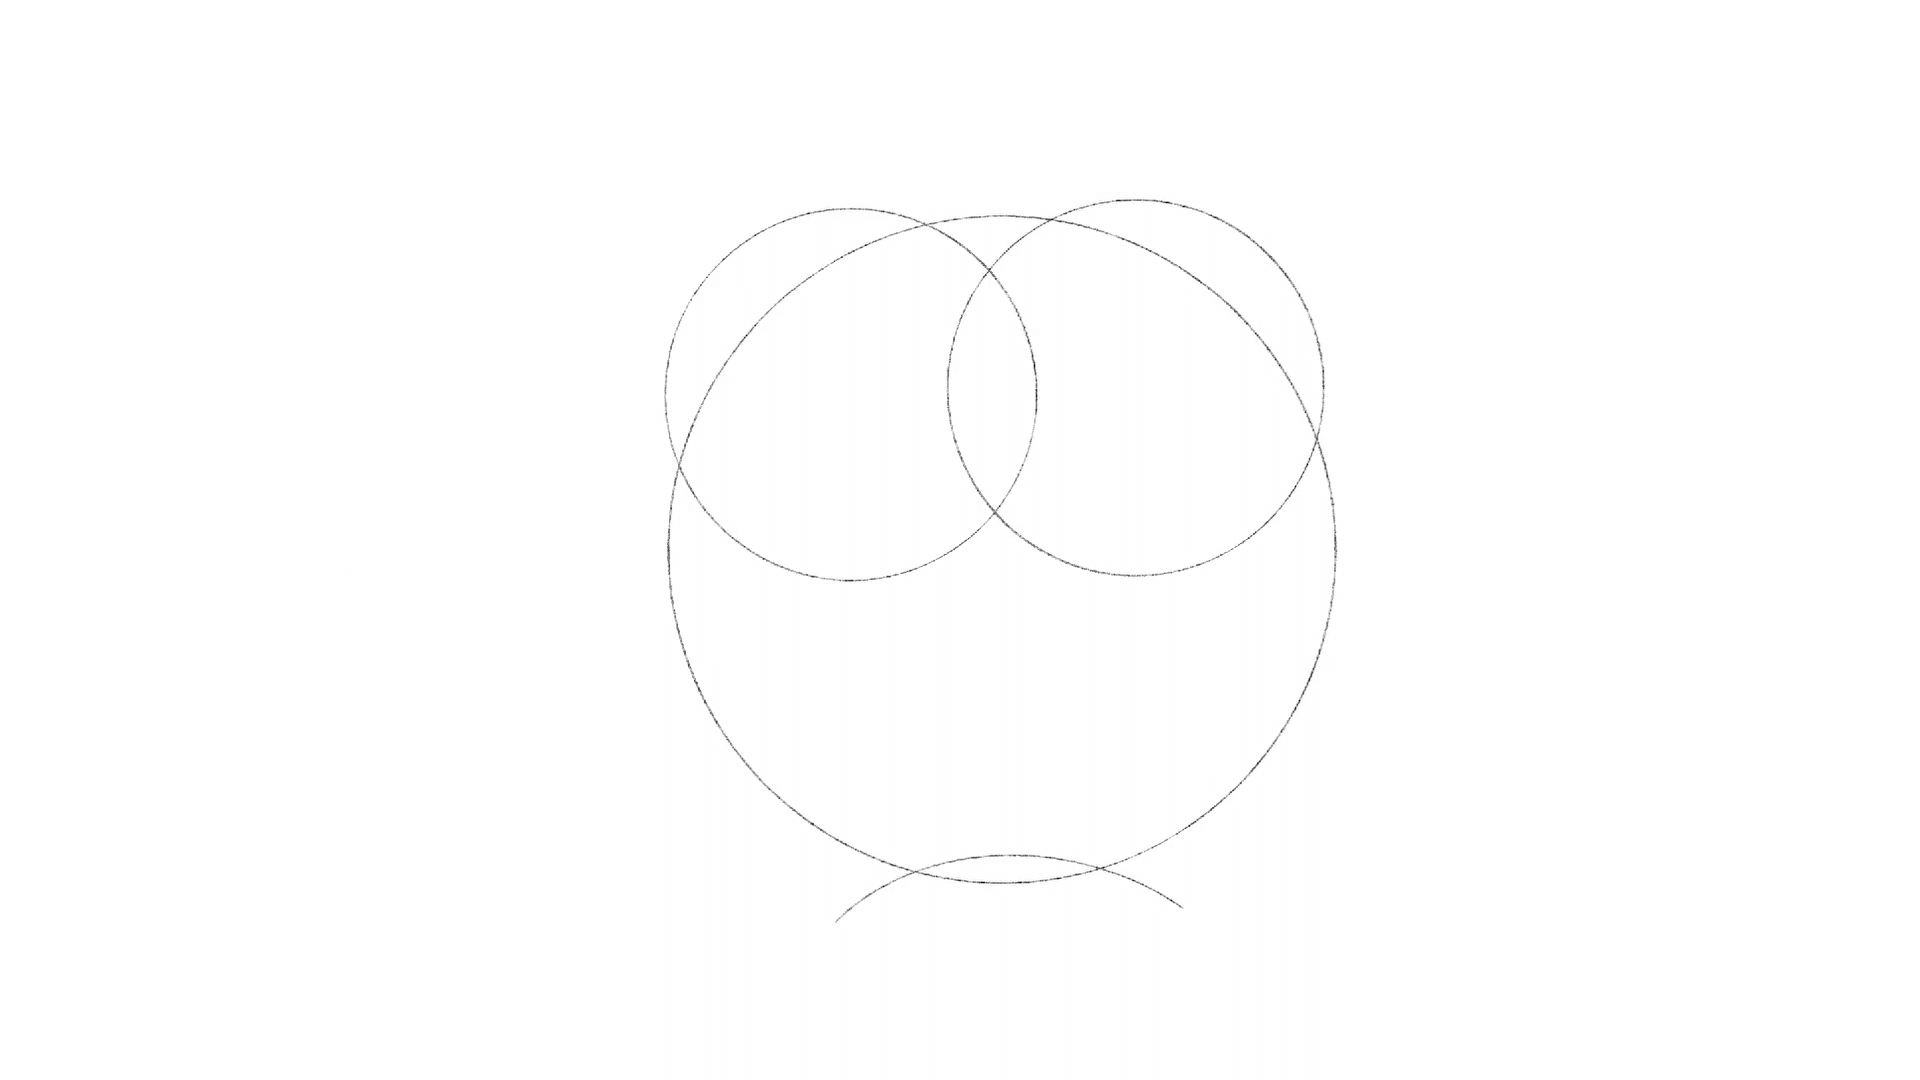 Step 2 of drawing the Apple logo: Draw two circles and an arc